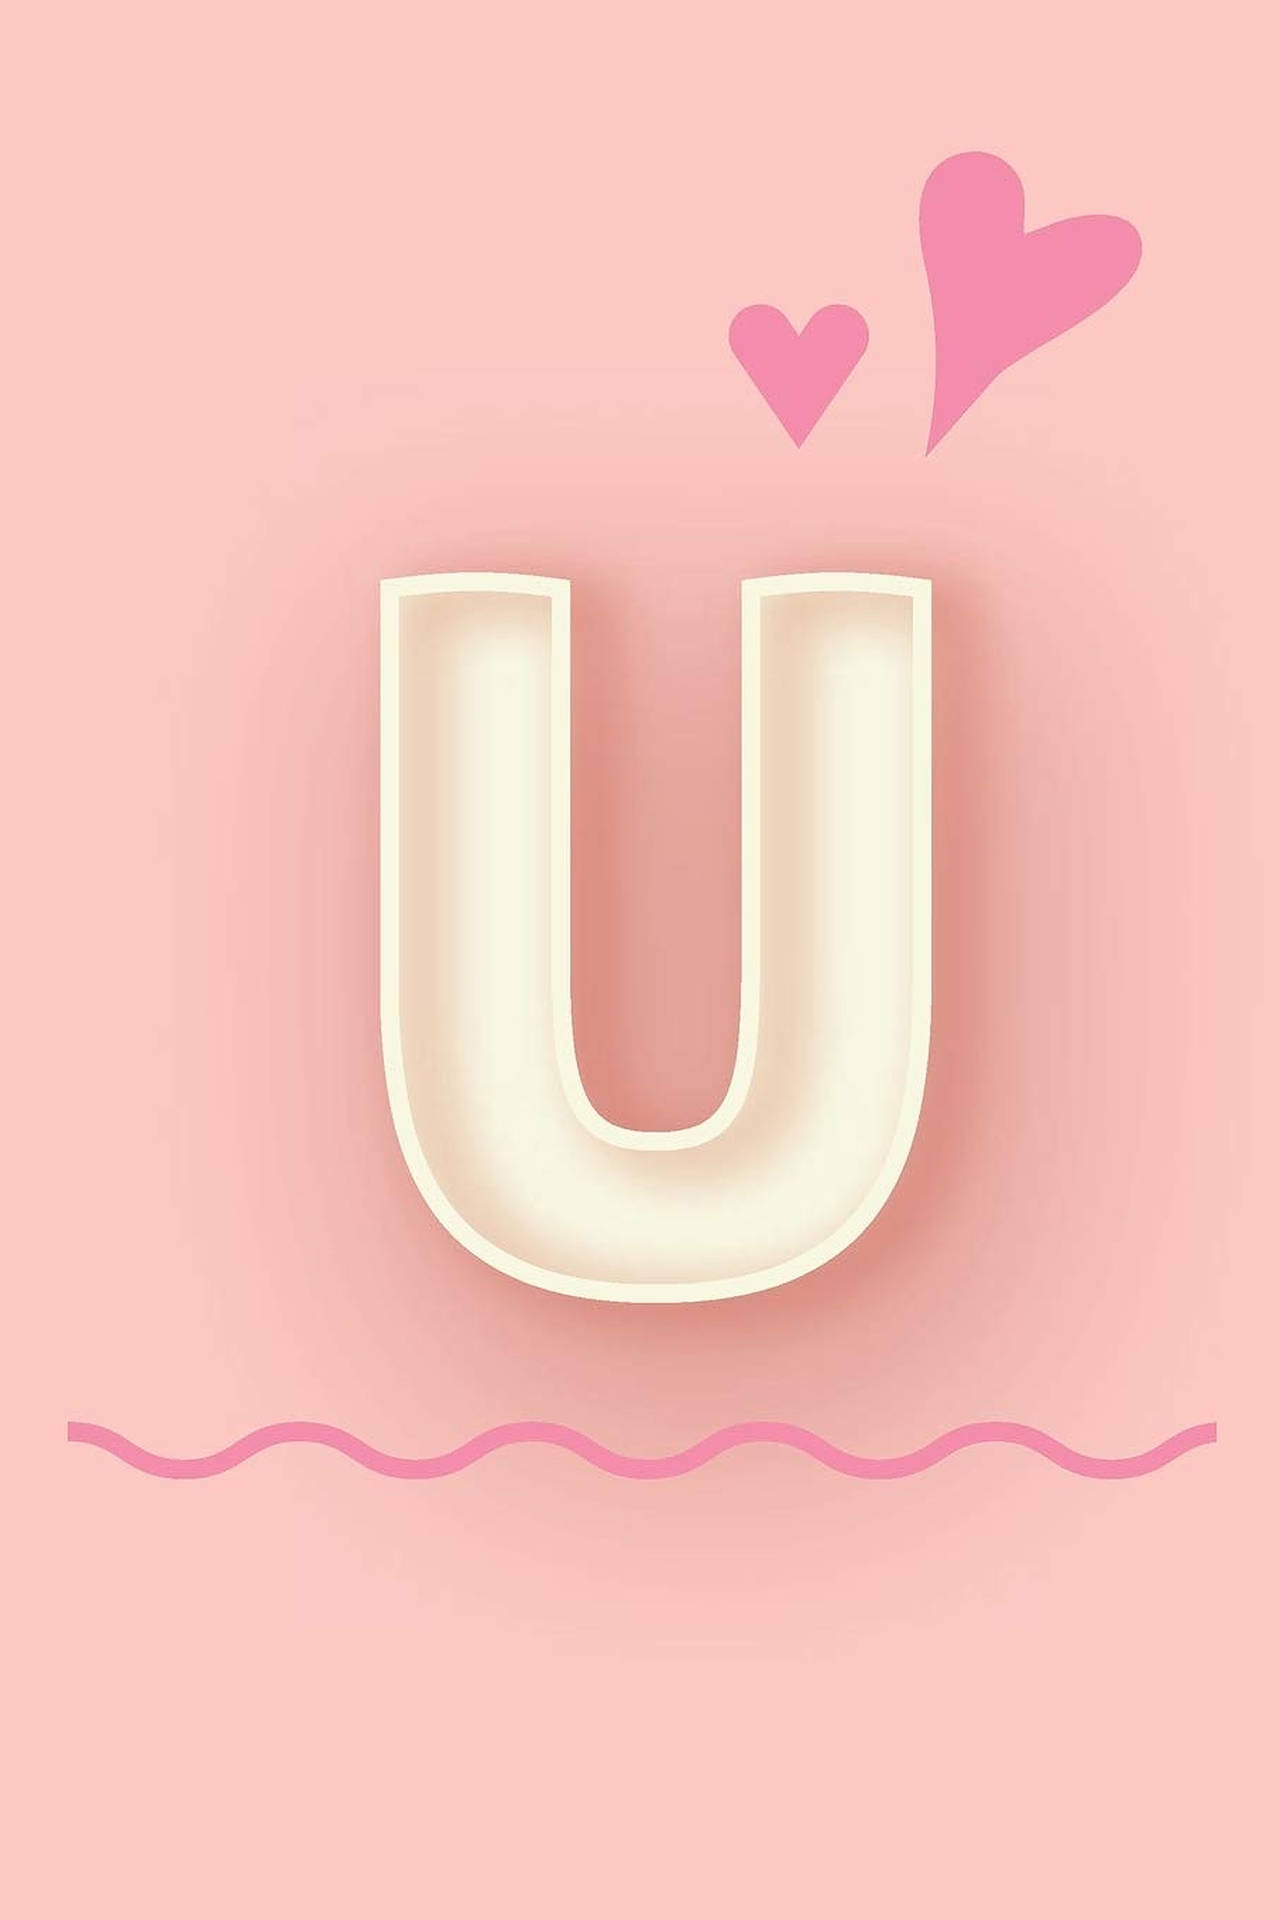 Letter U With Hearts Wallpaper